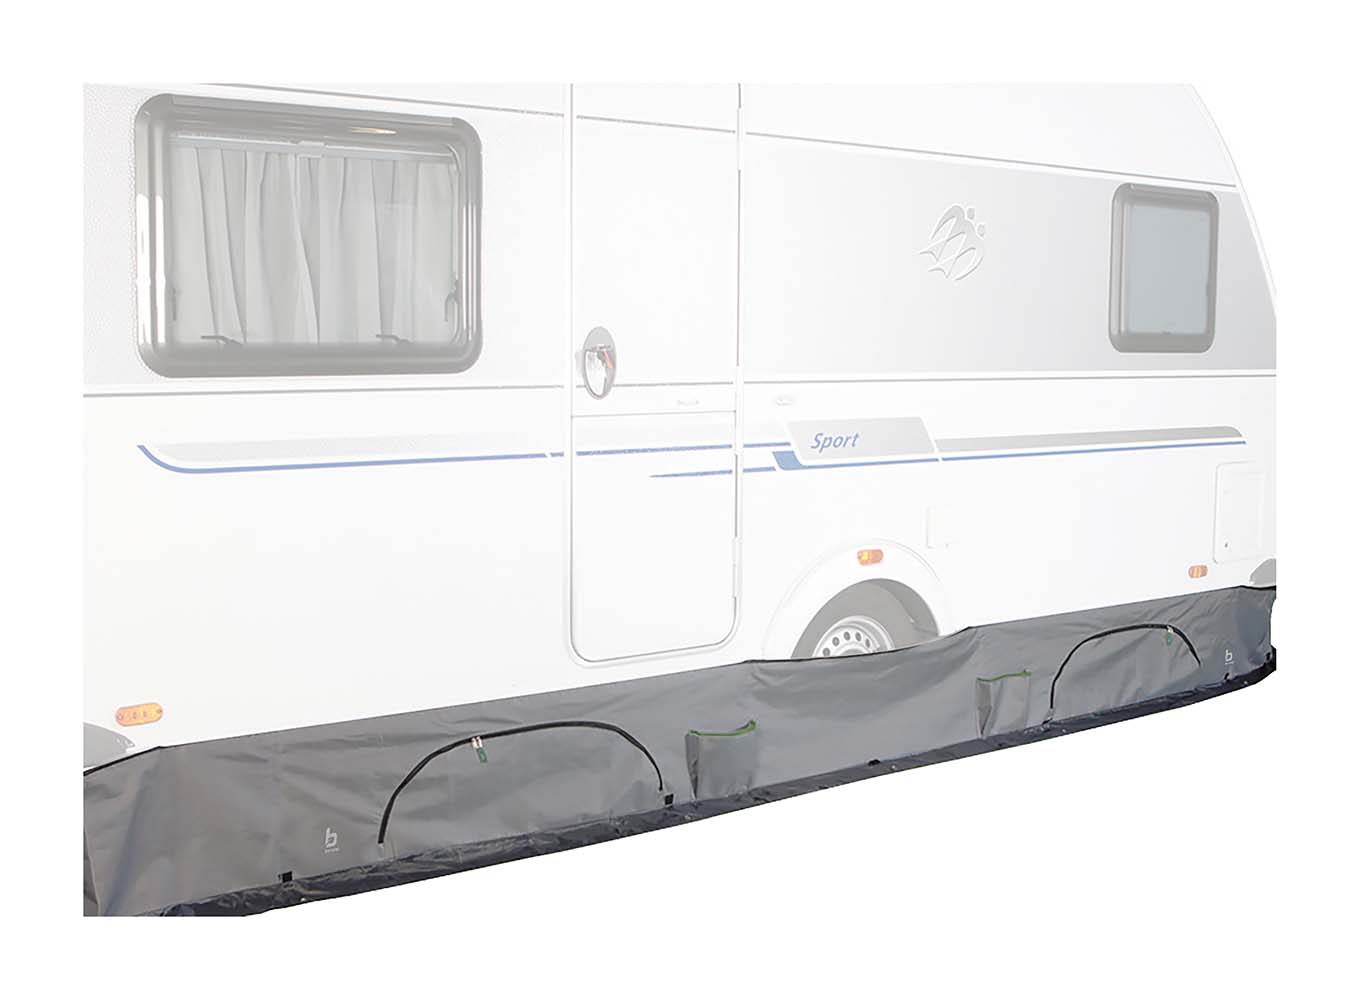 4117740 Draft strip with a string for the caravan. This draught strip has two mesh storage compartments and two large storage bags which are lockable with a zipper. The draught strip has eyelets and loops through which the draught strip can be properly tensioned under all caravans. Suitable for all caravans between 4 and 6 meters because the draught strip can easily be folded out from 4 meters, per 0.5 meters, to 6 meters. The height is 52 centimetres of which 14 centimetres is waterproof 190T polyester with a PU coating (water column: 1500 mm). The other fabric is the luxury 300 denier PVC coated polyester.